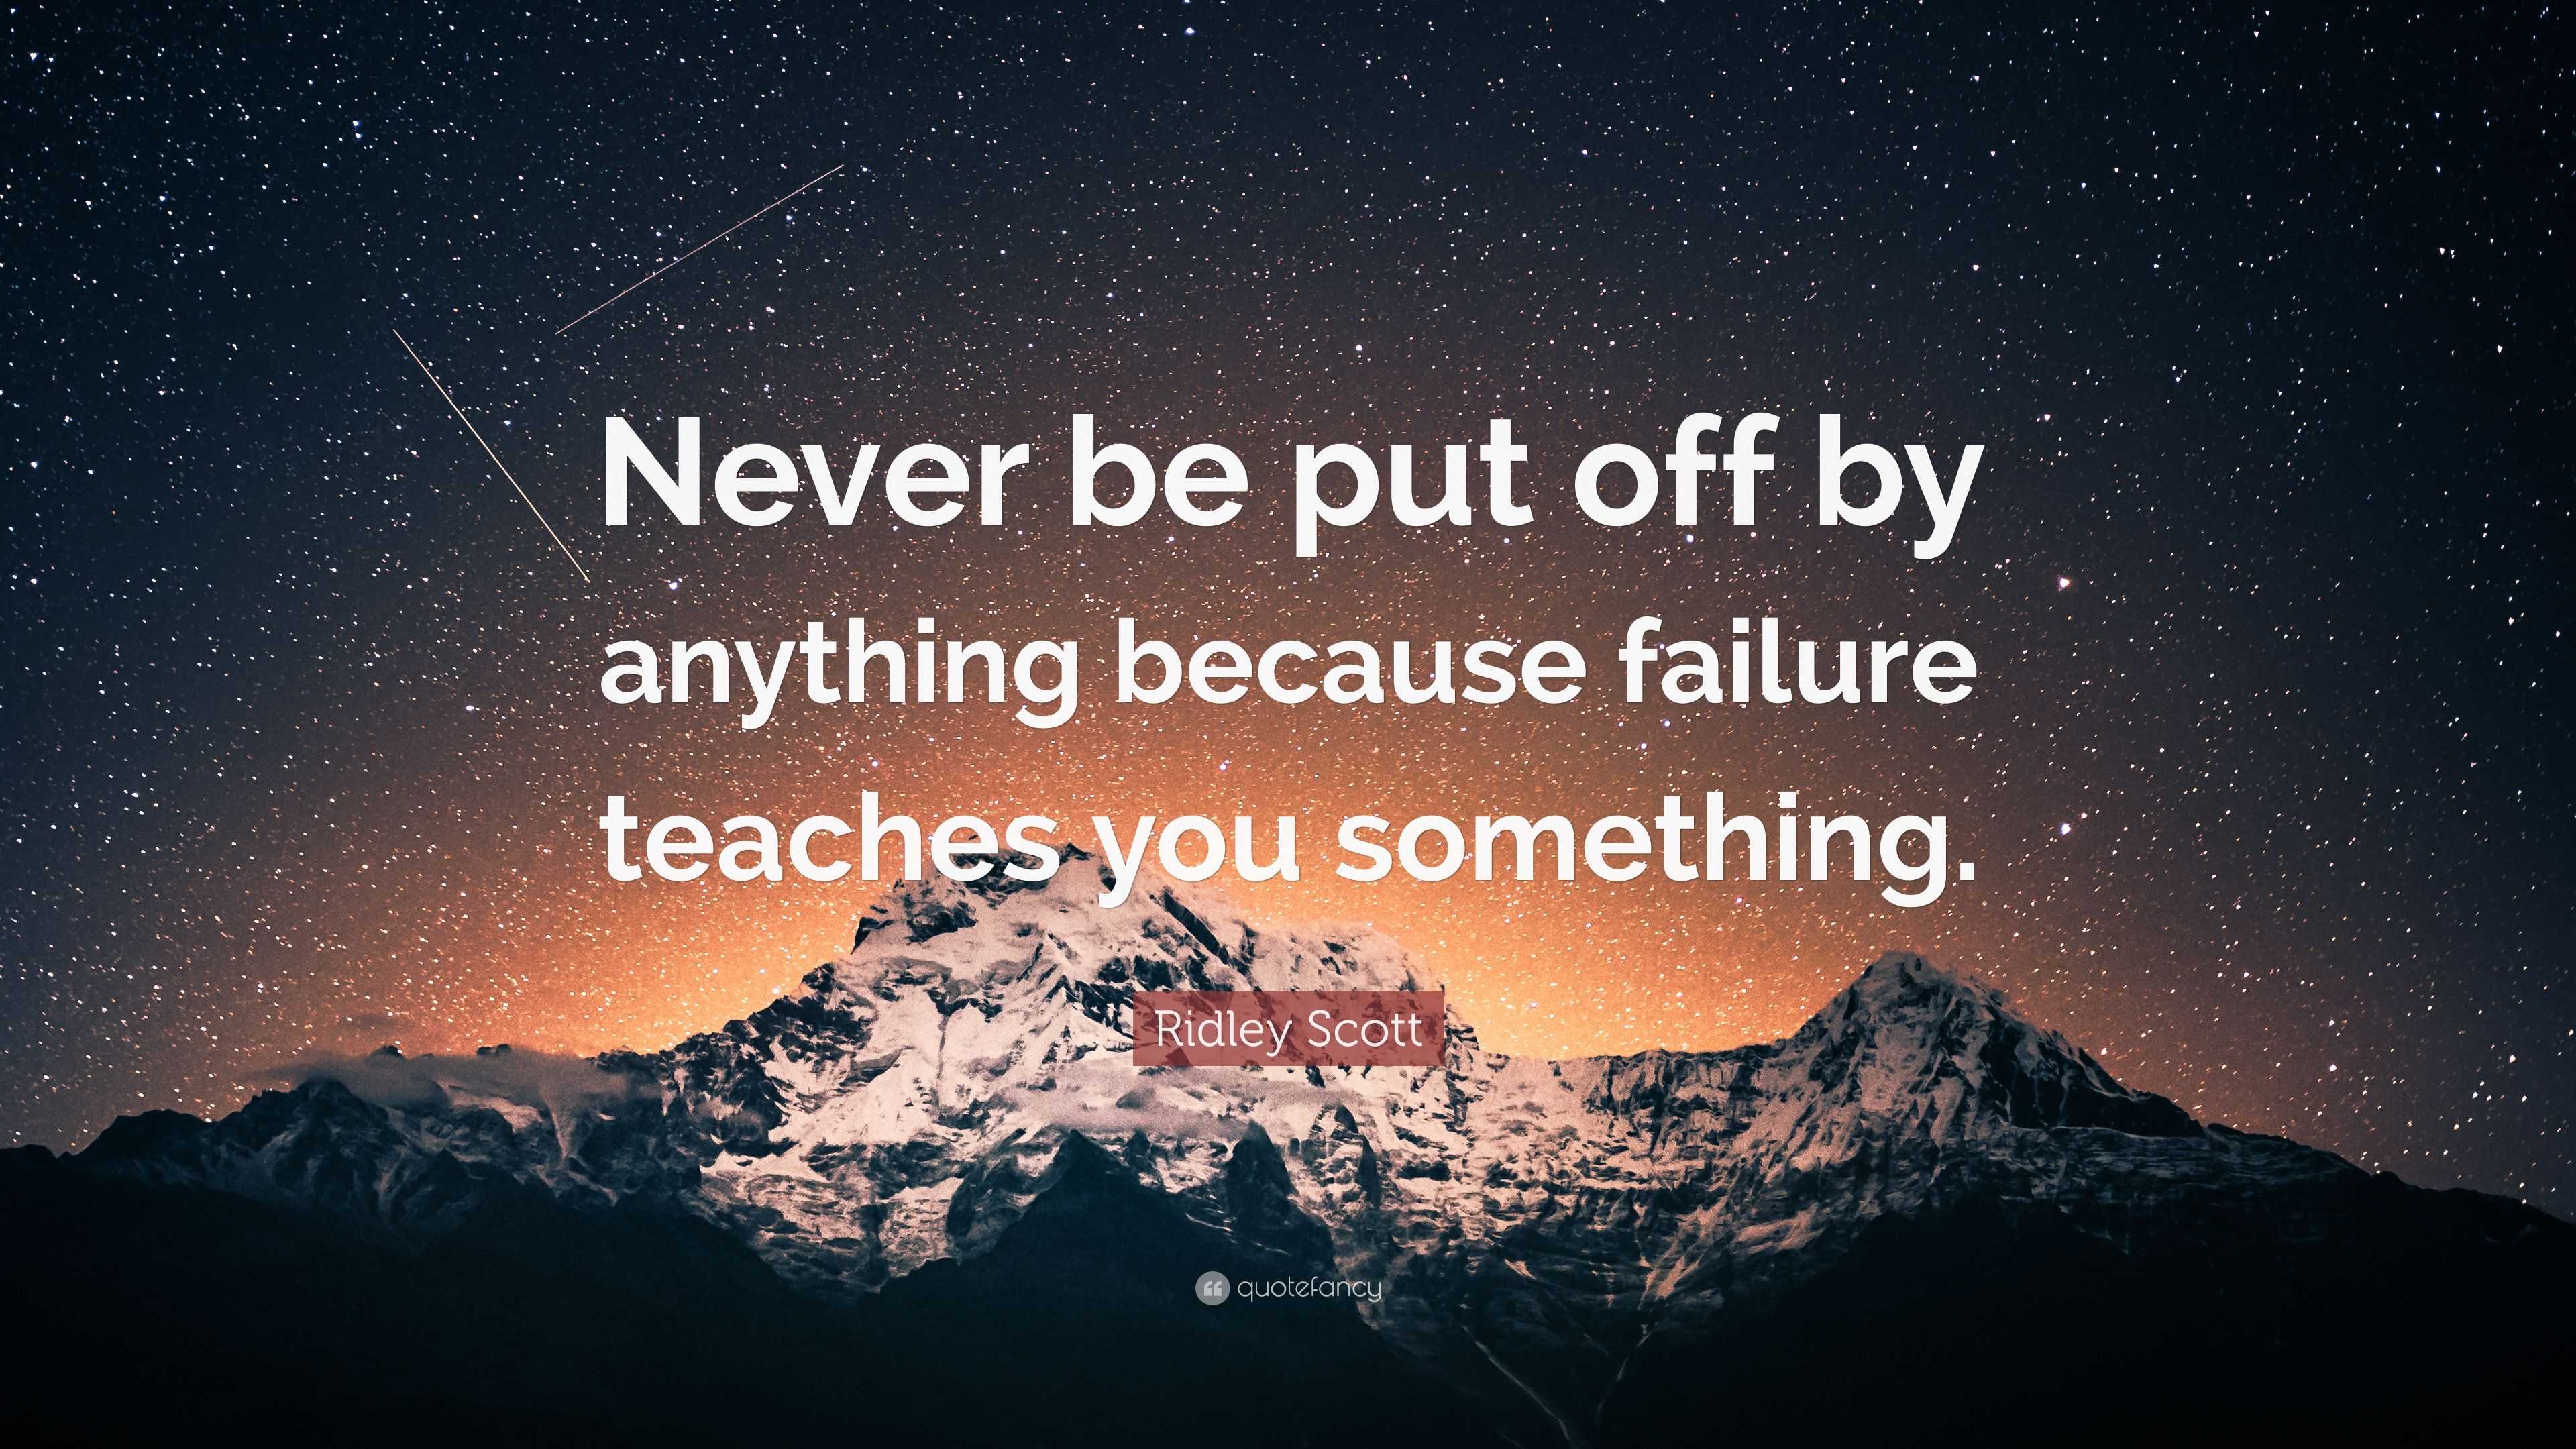 Ridley Scott Quote: “Never be put off by anything because failure